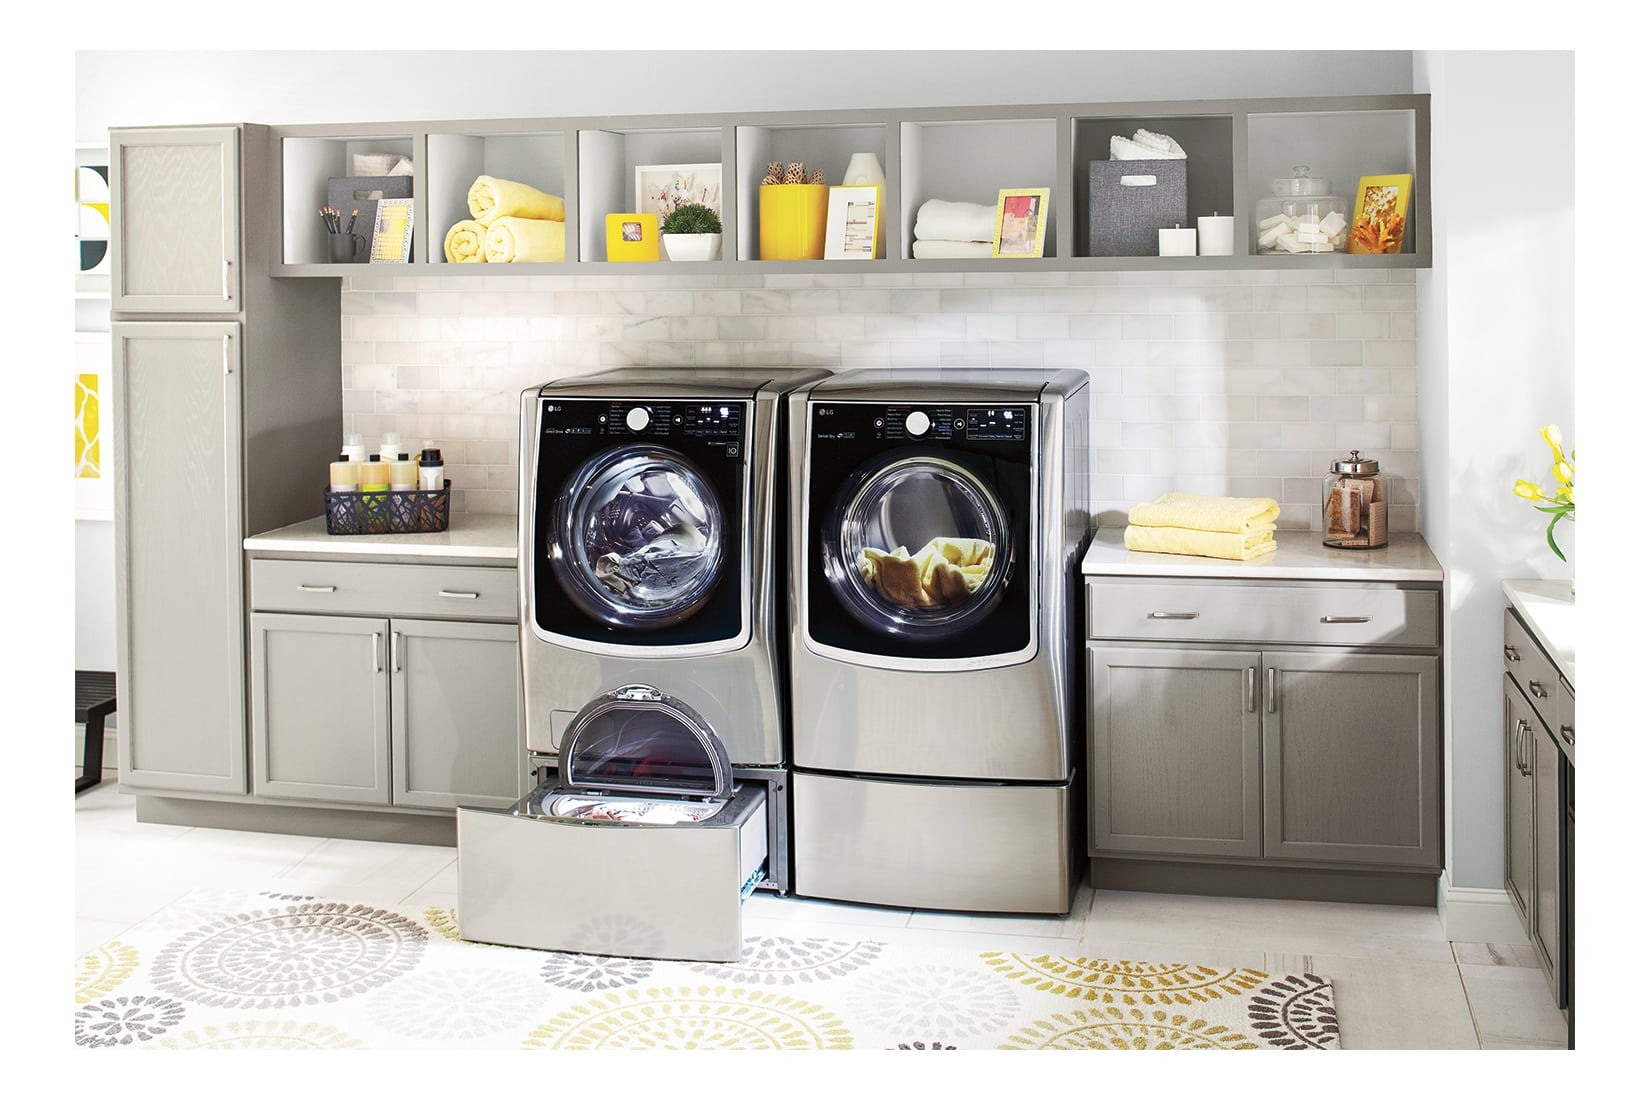 LG Front Load Laundry Machines at Best Buy! @BestBuy @LGUS #ad